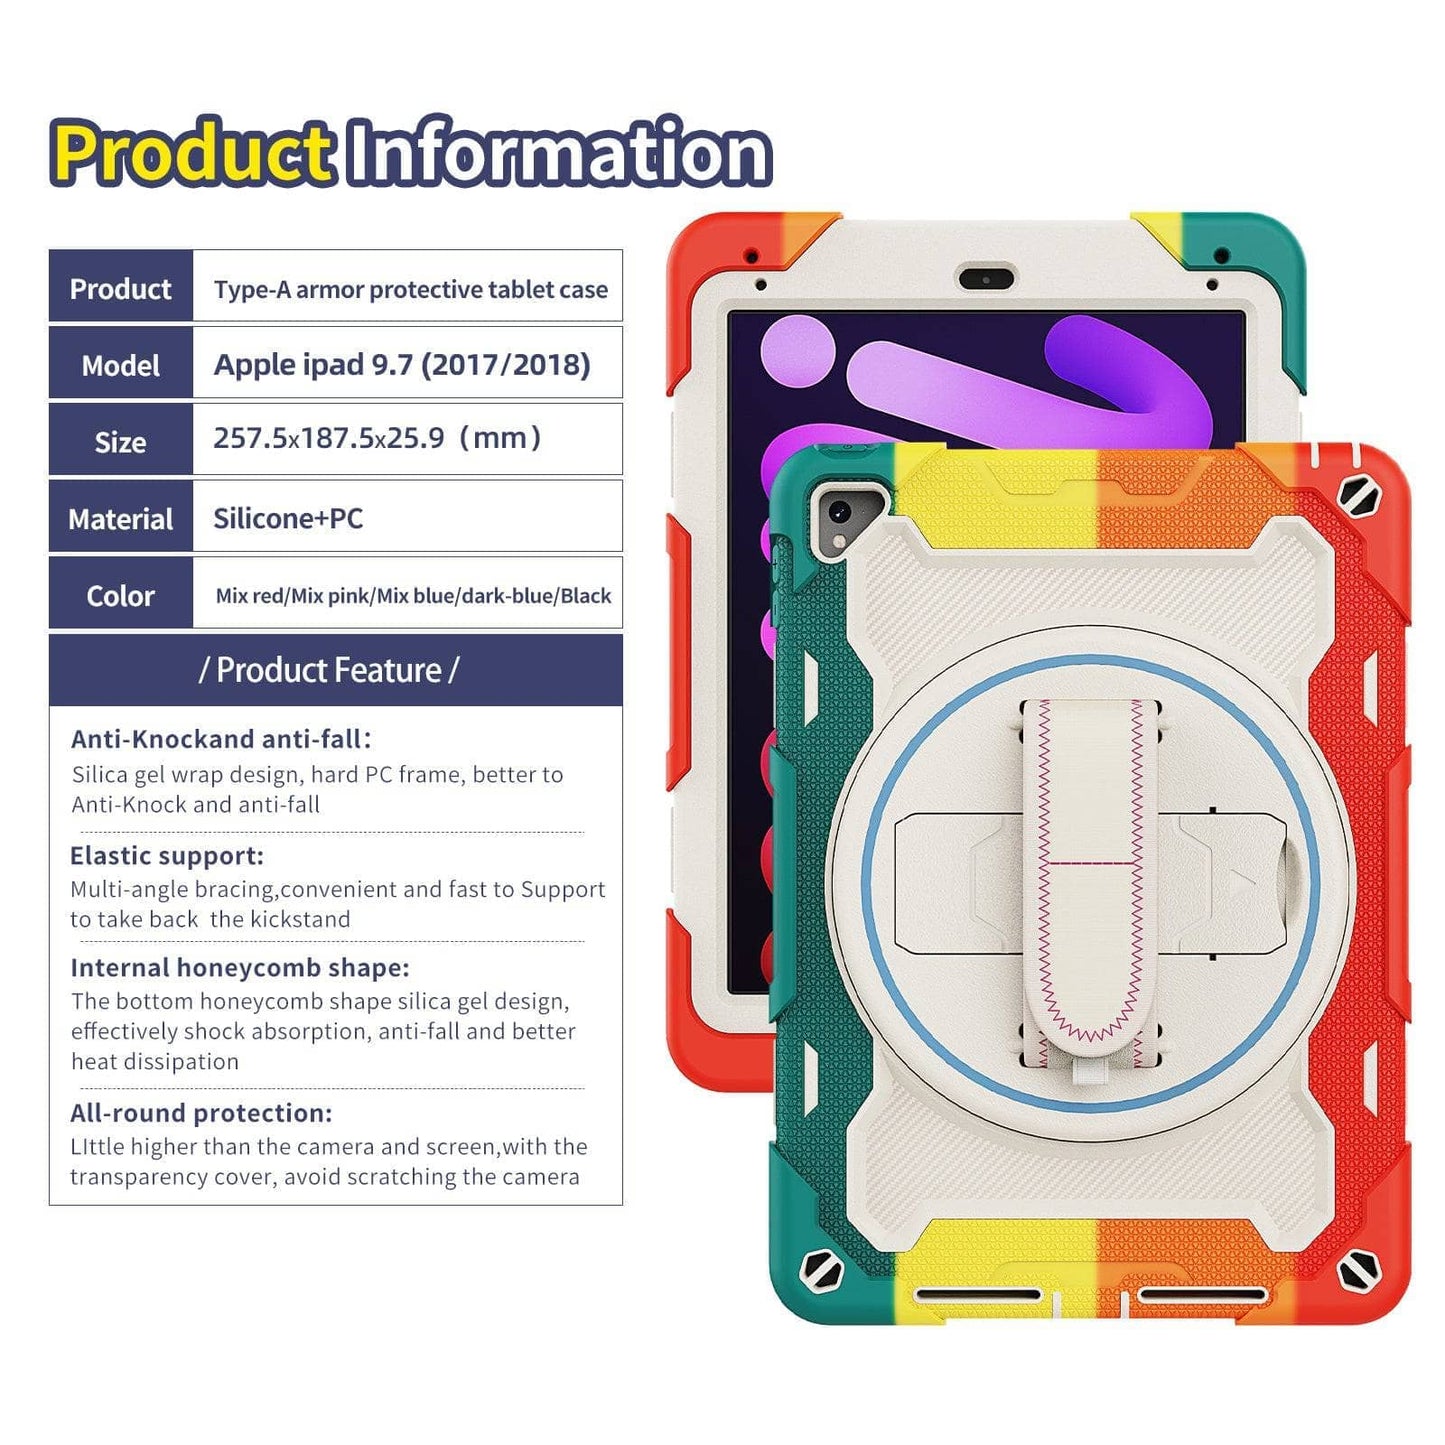 Case For iPad 9.7 2017 2018 Heavy Duty Shockproof Kids Cover For iPad Pro 9.7 inch 5th Generation Tablet Case Shoulder Strap-iPad Case-MASCOTS-www.PhoneGuy.com.au